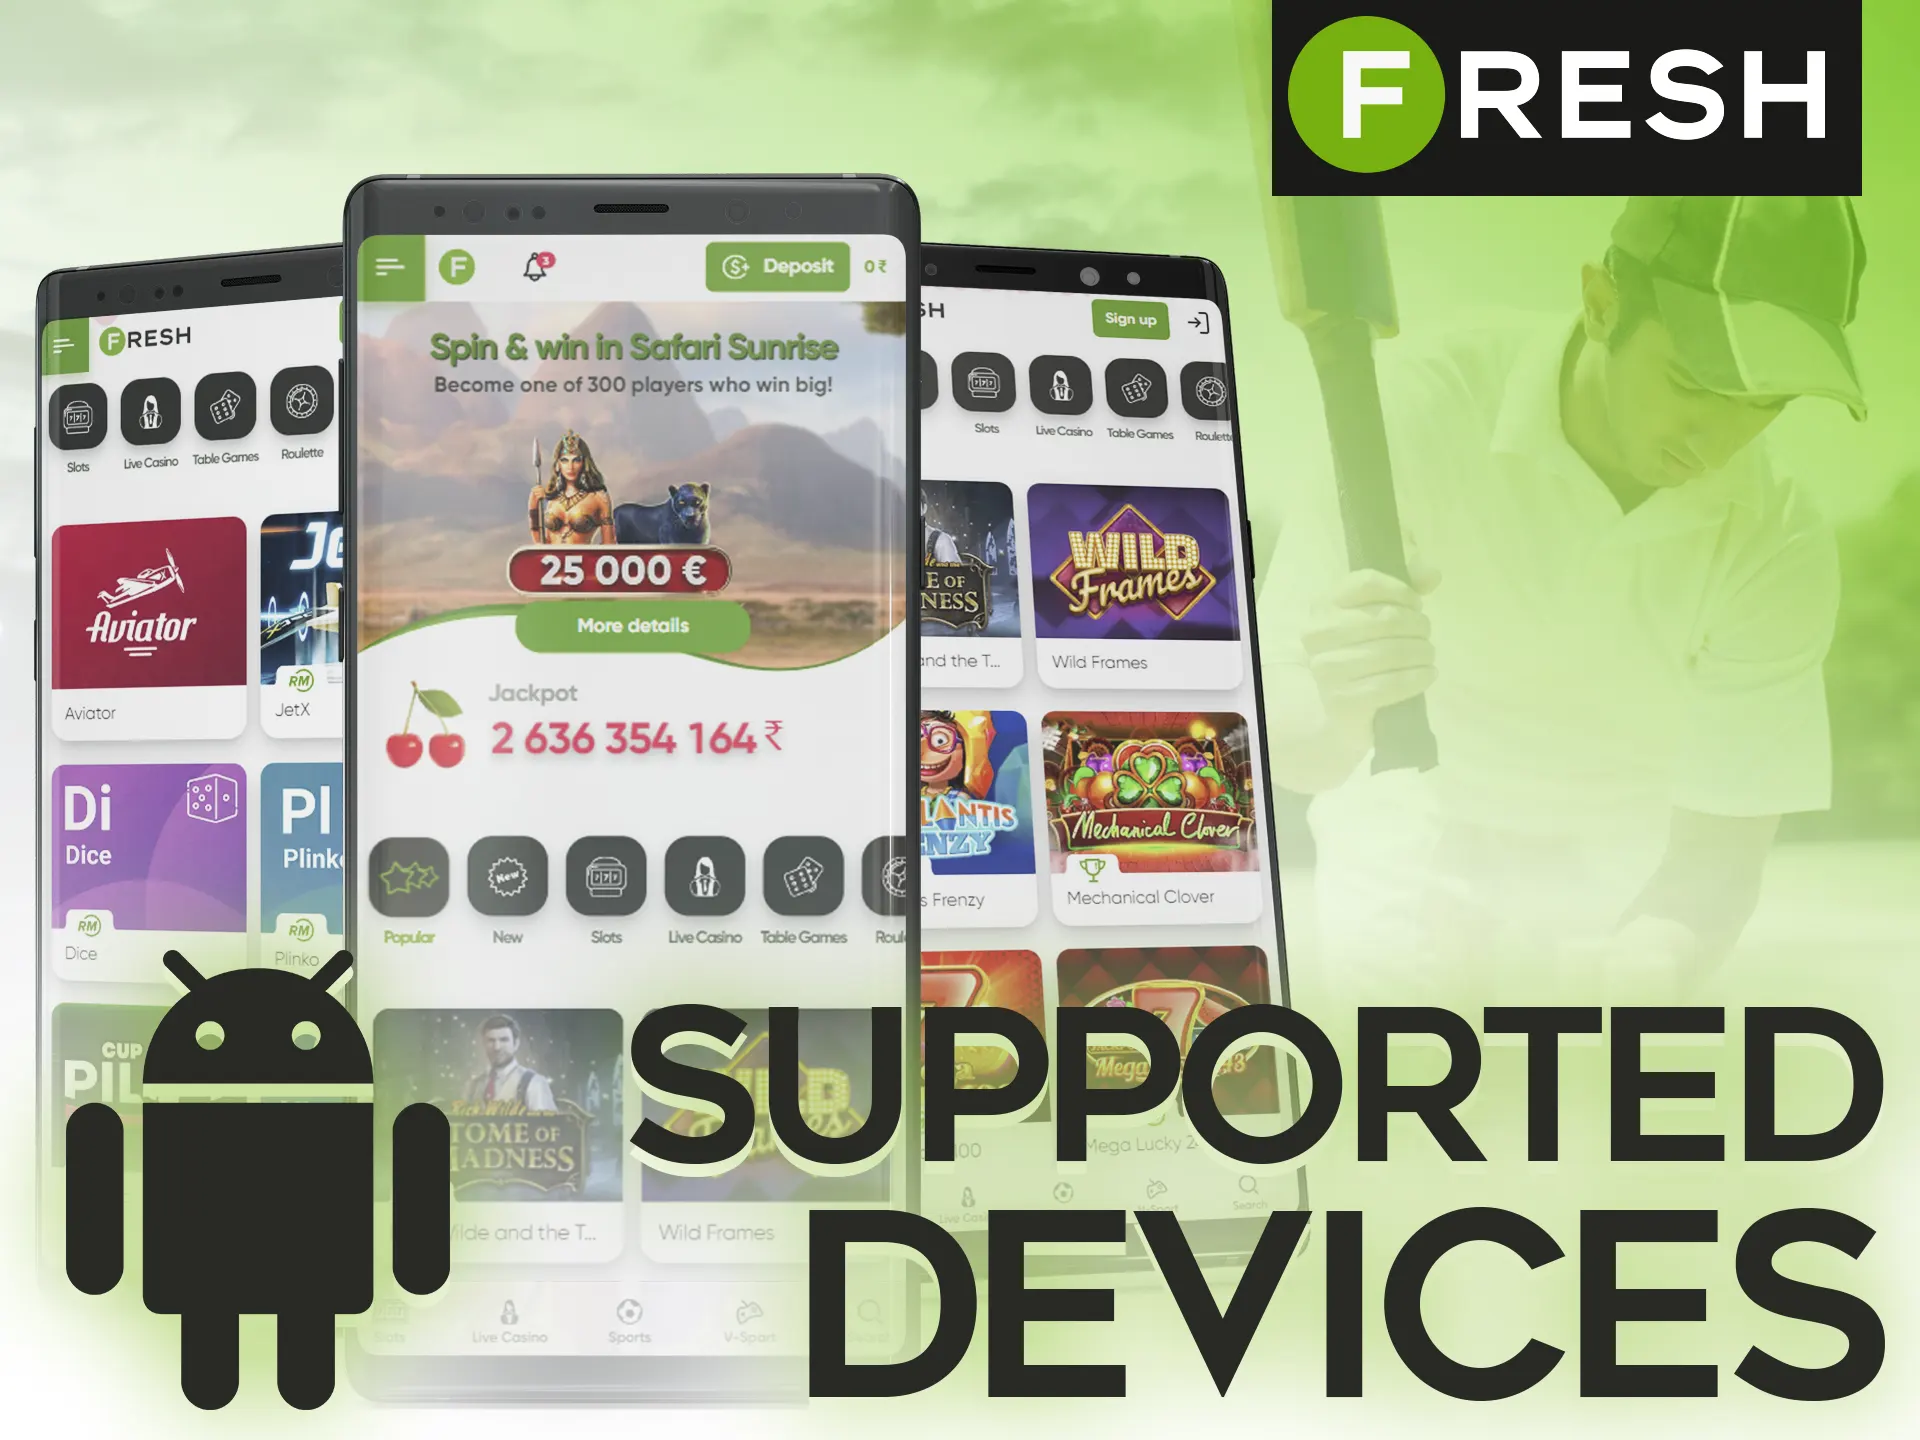 Check the list of the supported Android devices for the Fresh Casino app.